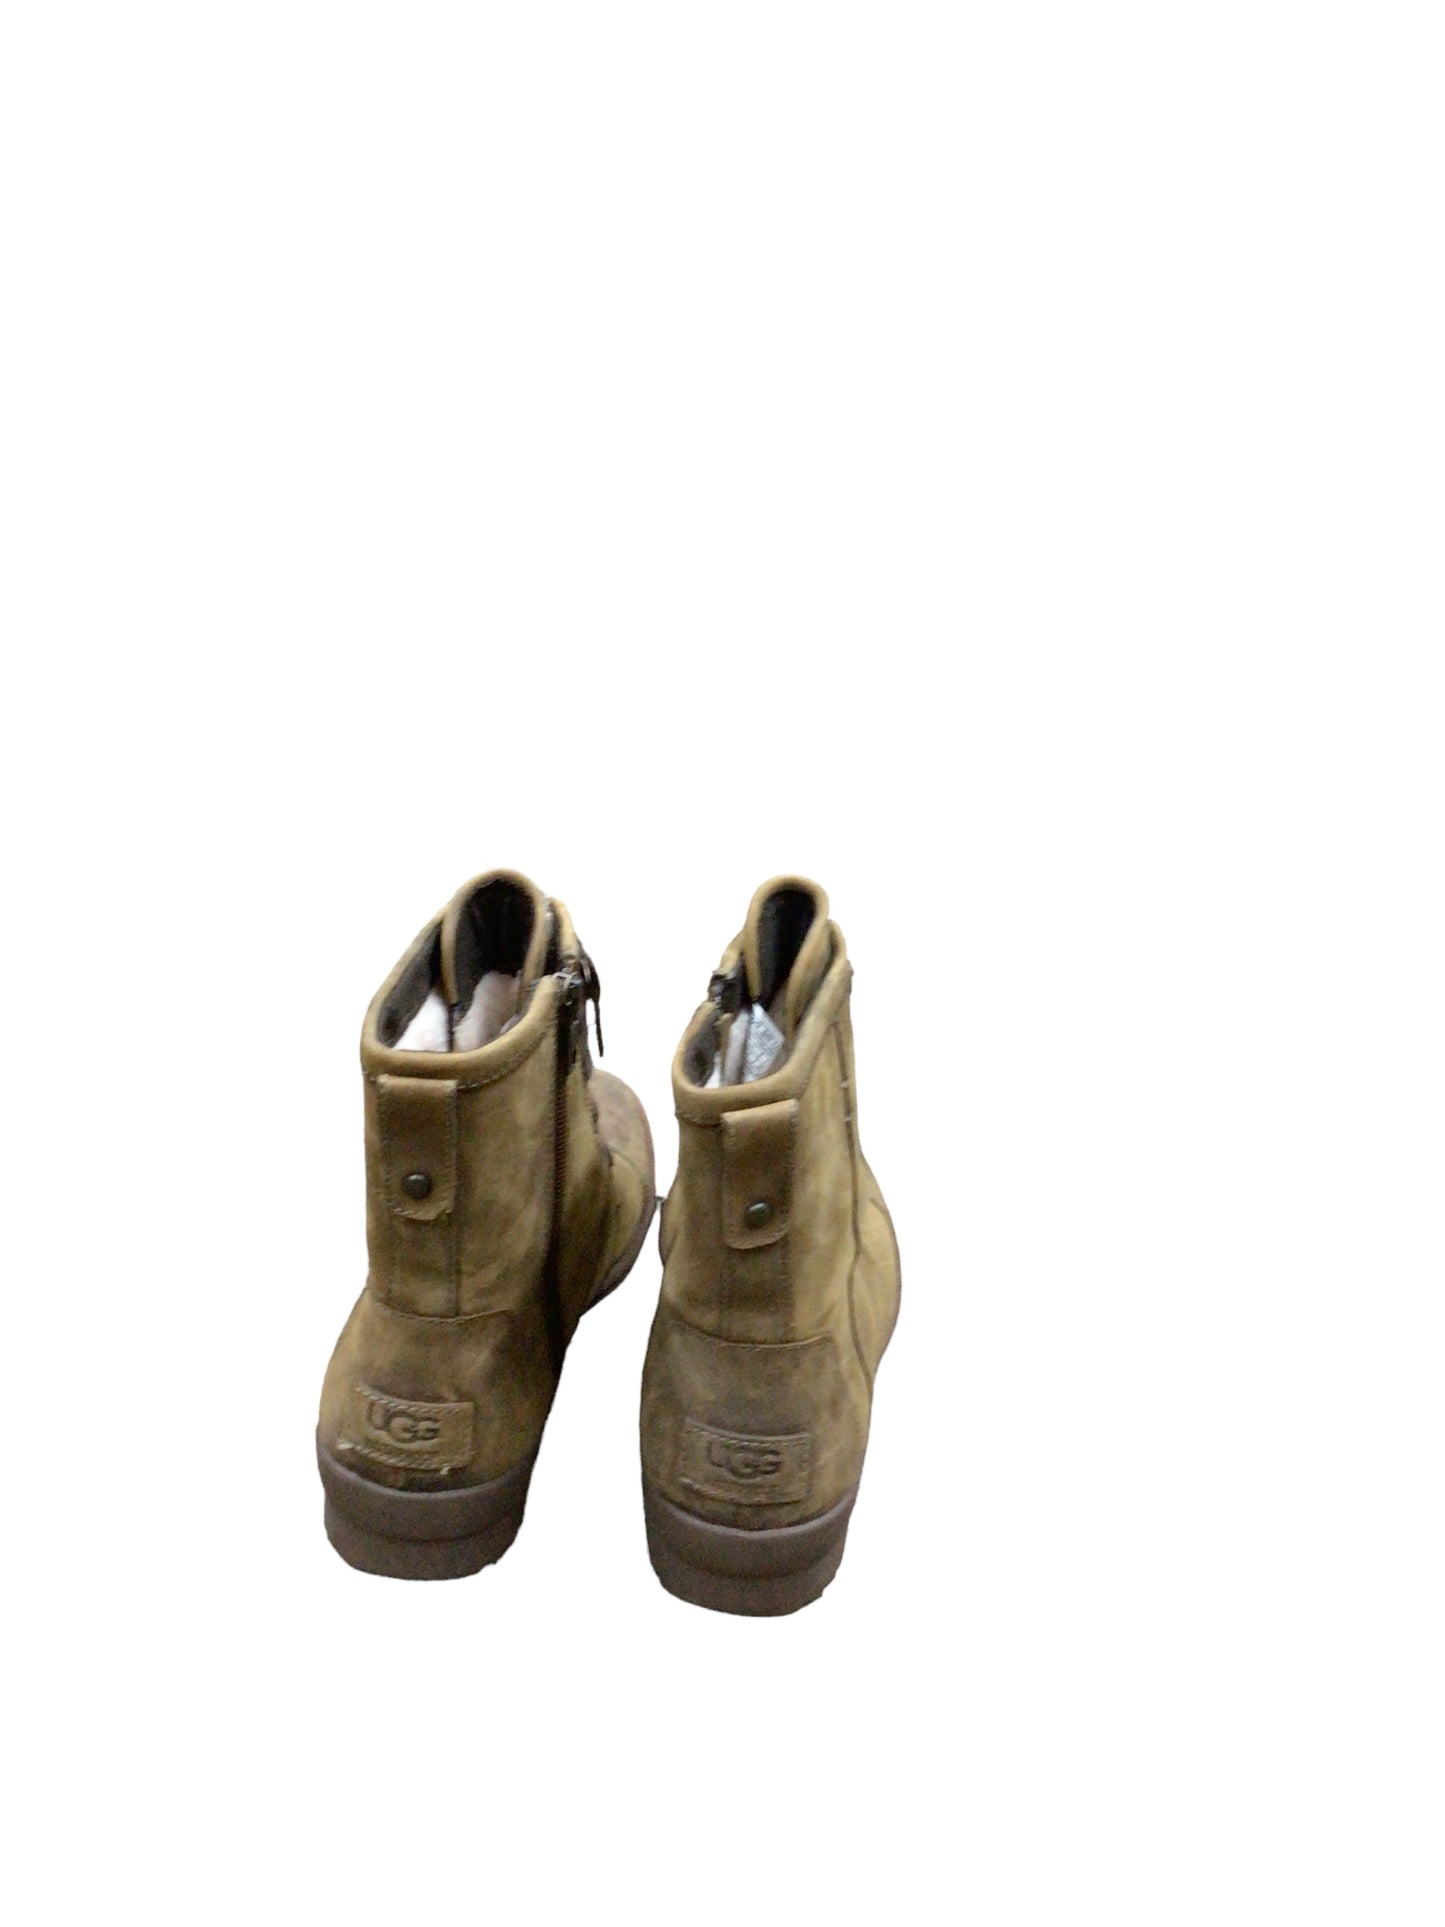 Boots Leather By Ugg  Size: 8